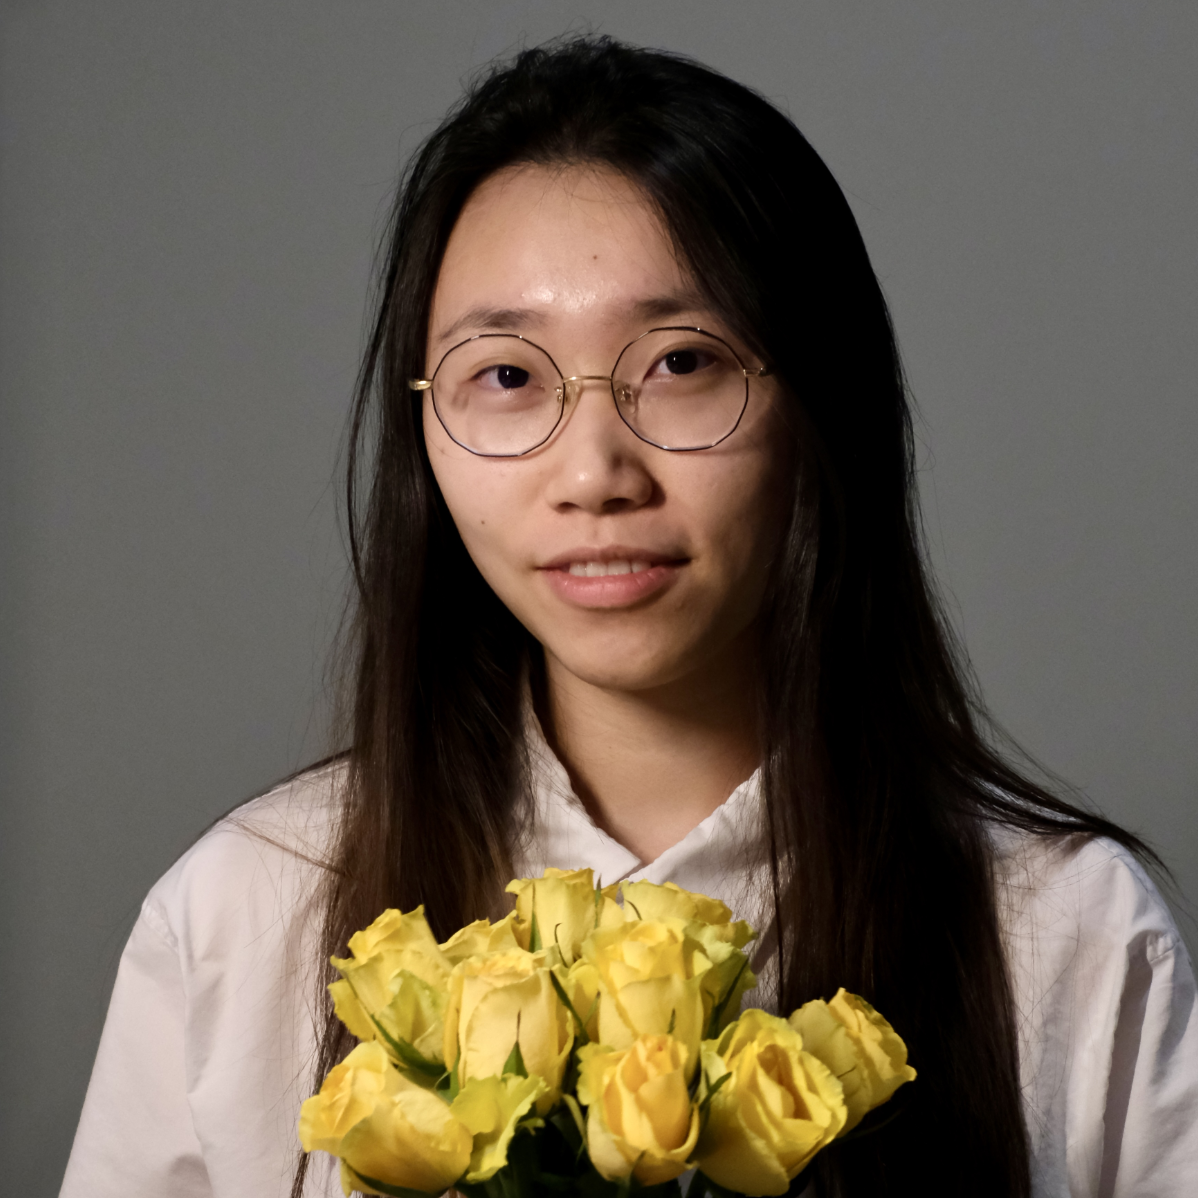 Portrait of young woman with long black hair, wire rimmed glasses smiling at viewer and holding a bouquet of yellow roses.